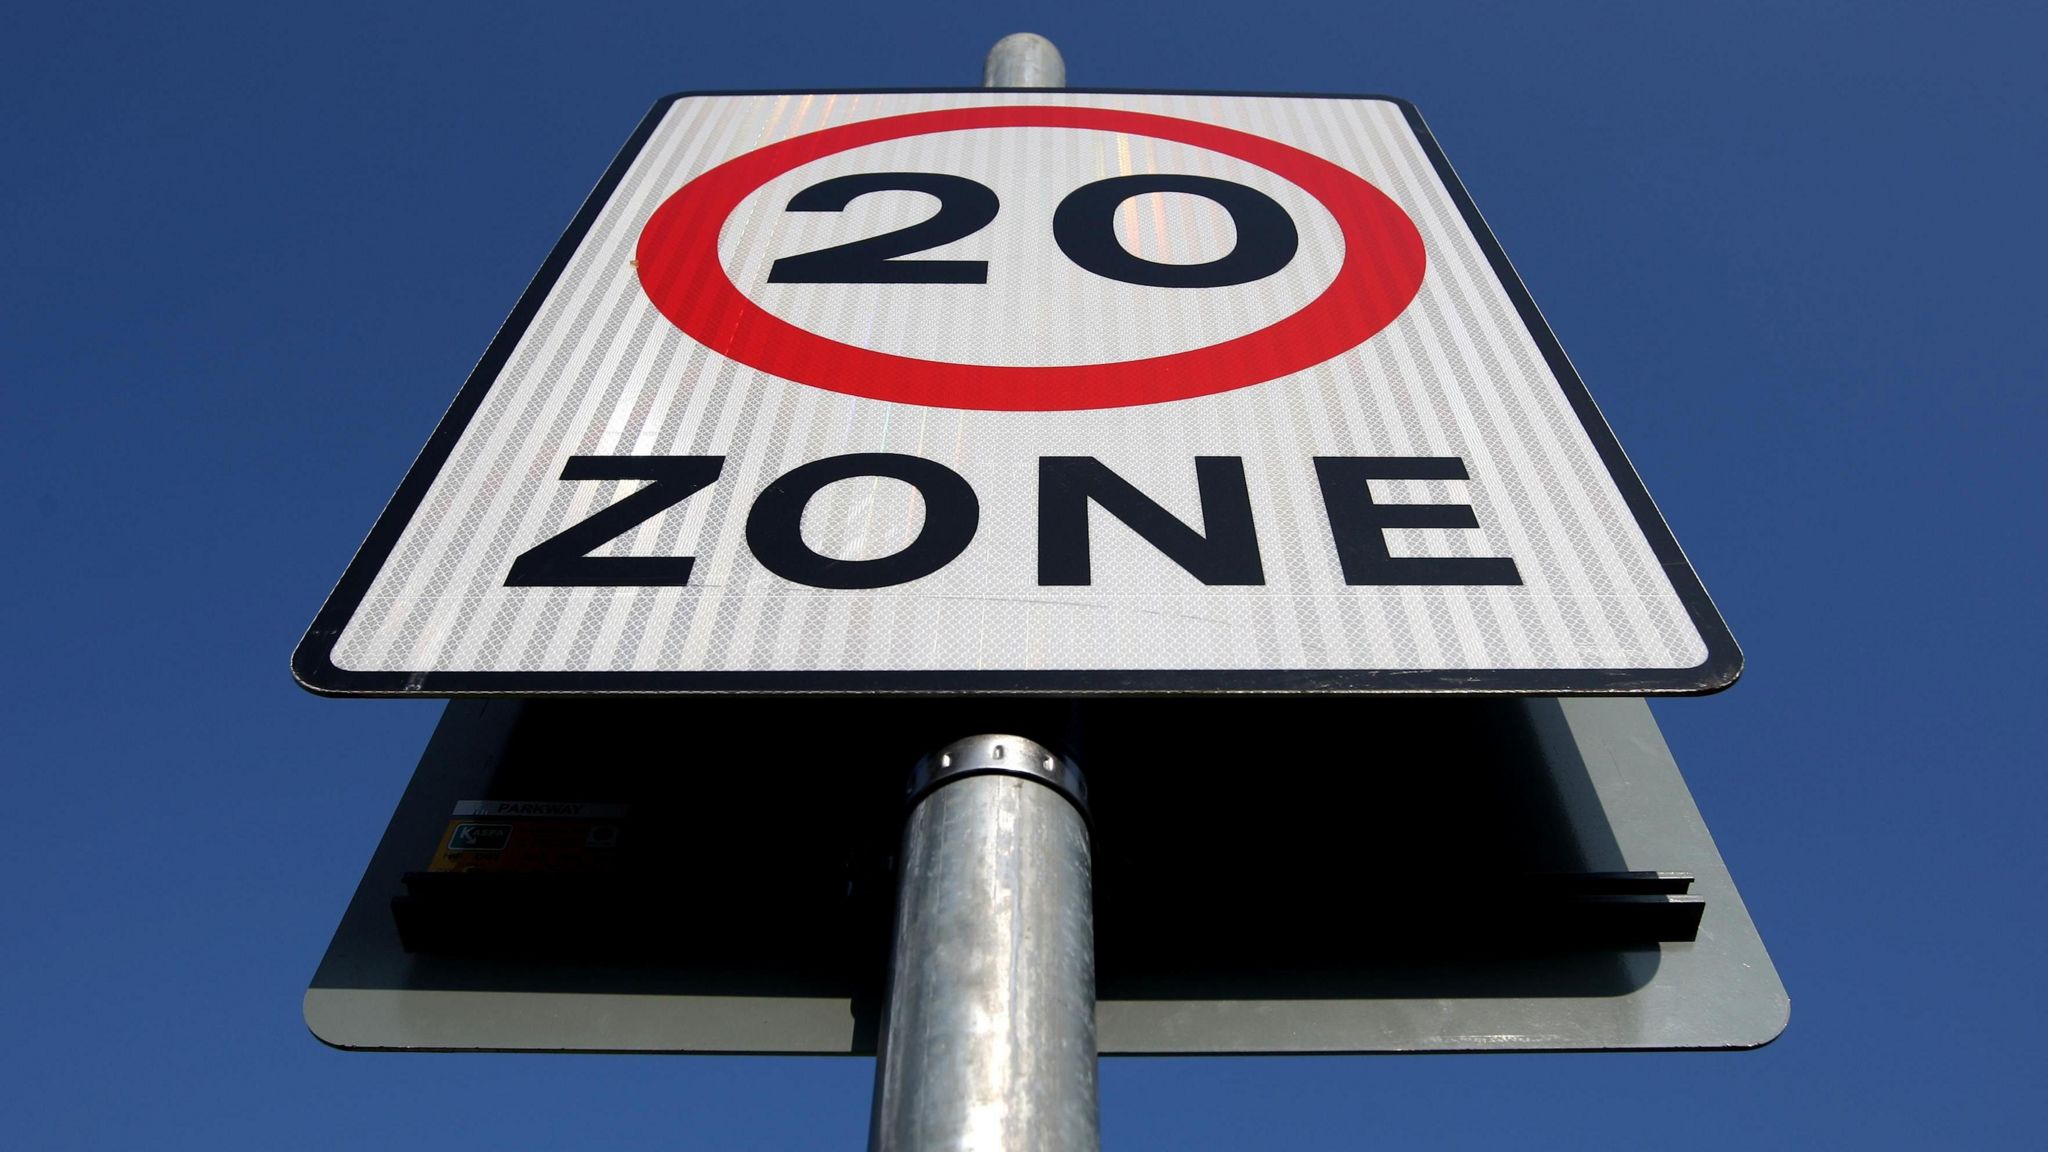 A 20mp/h speed zone sign